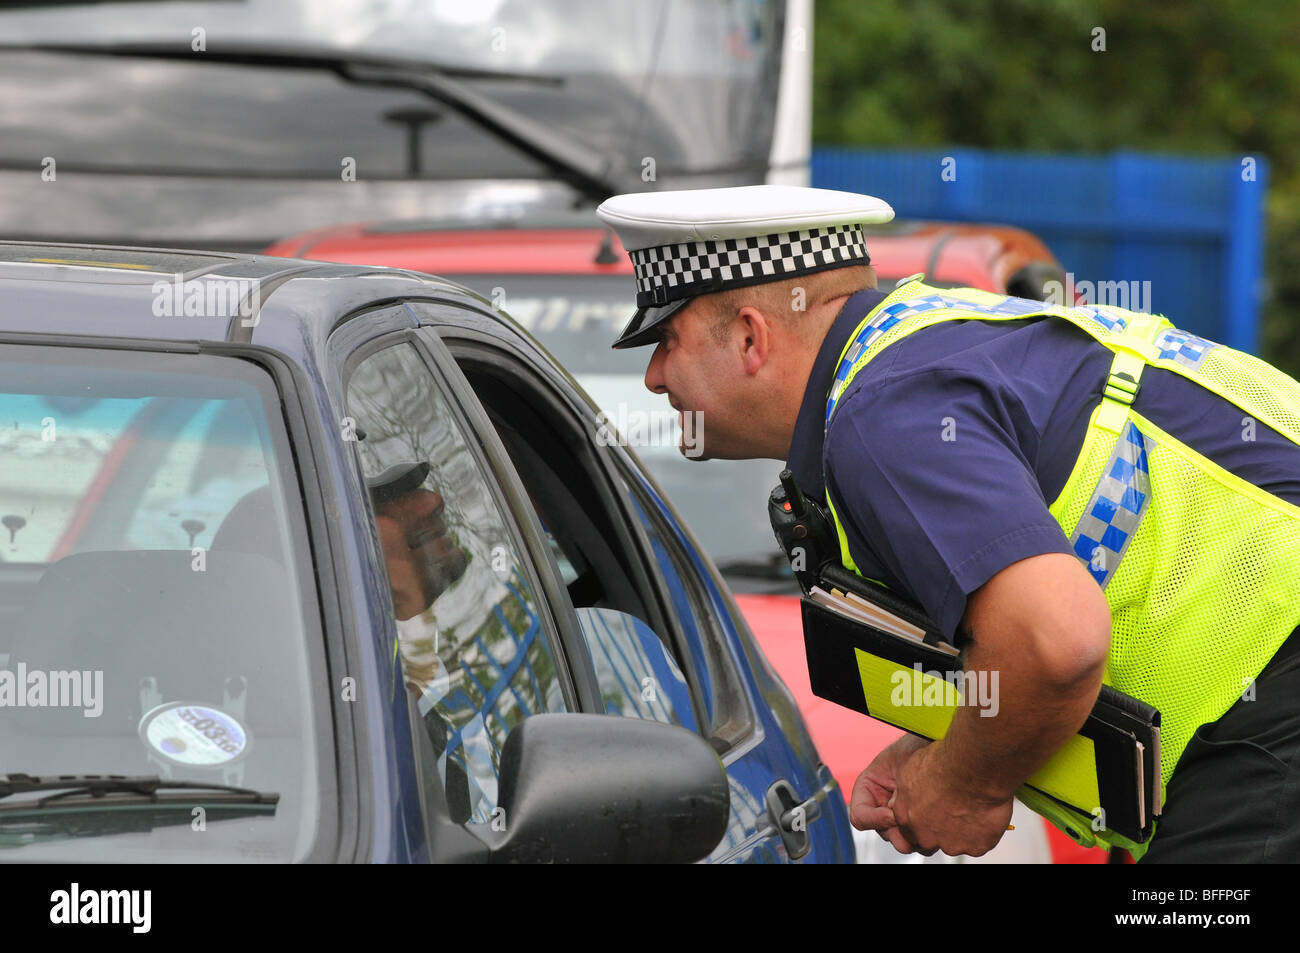 Police Officer questions a driver of a car, Britain, UK Stock Photo